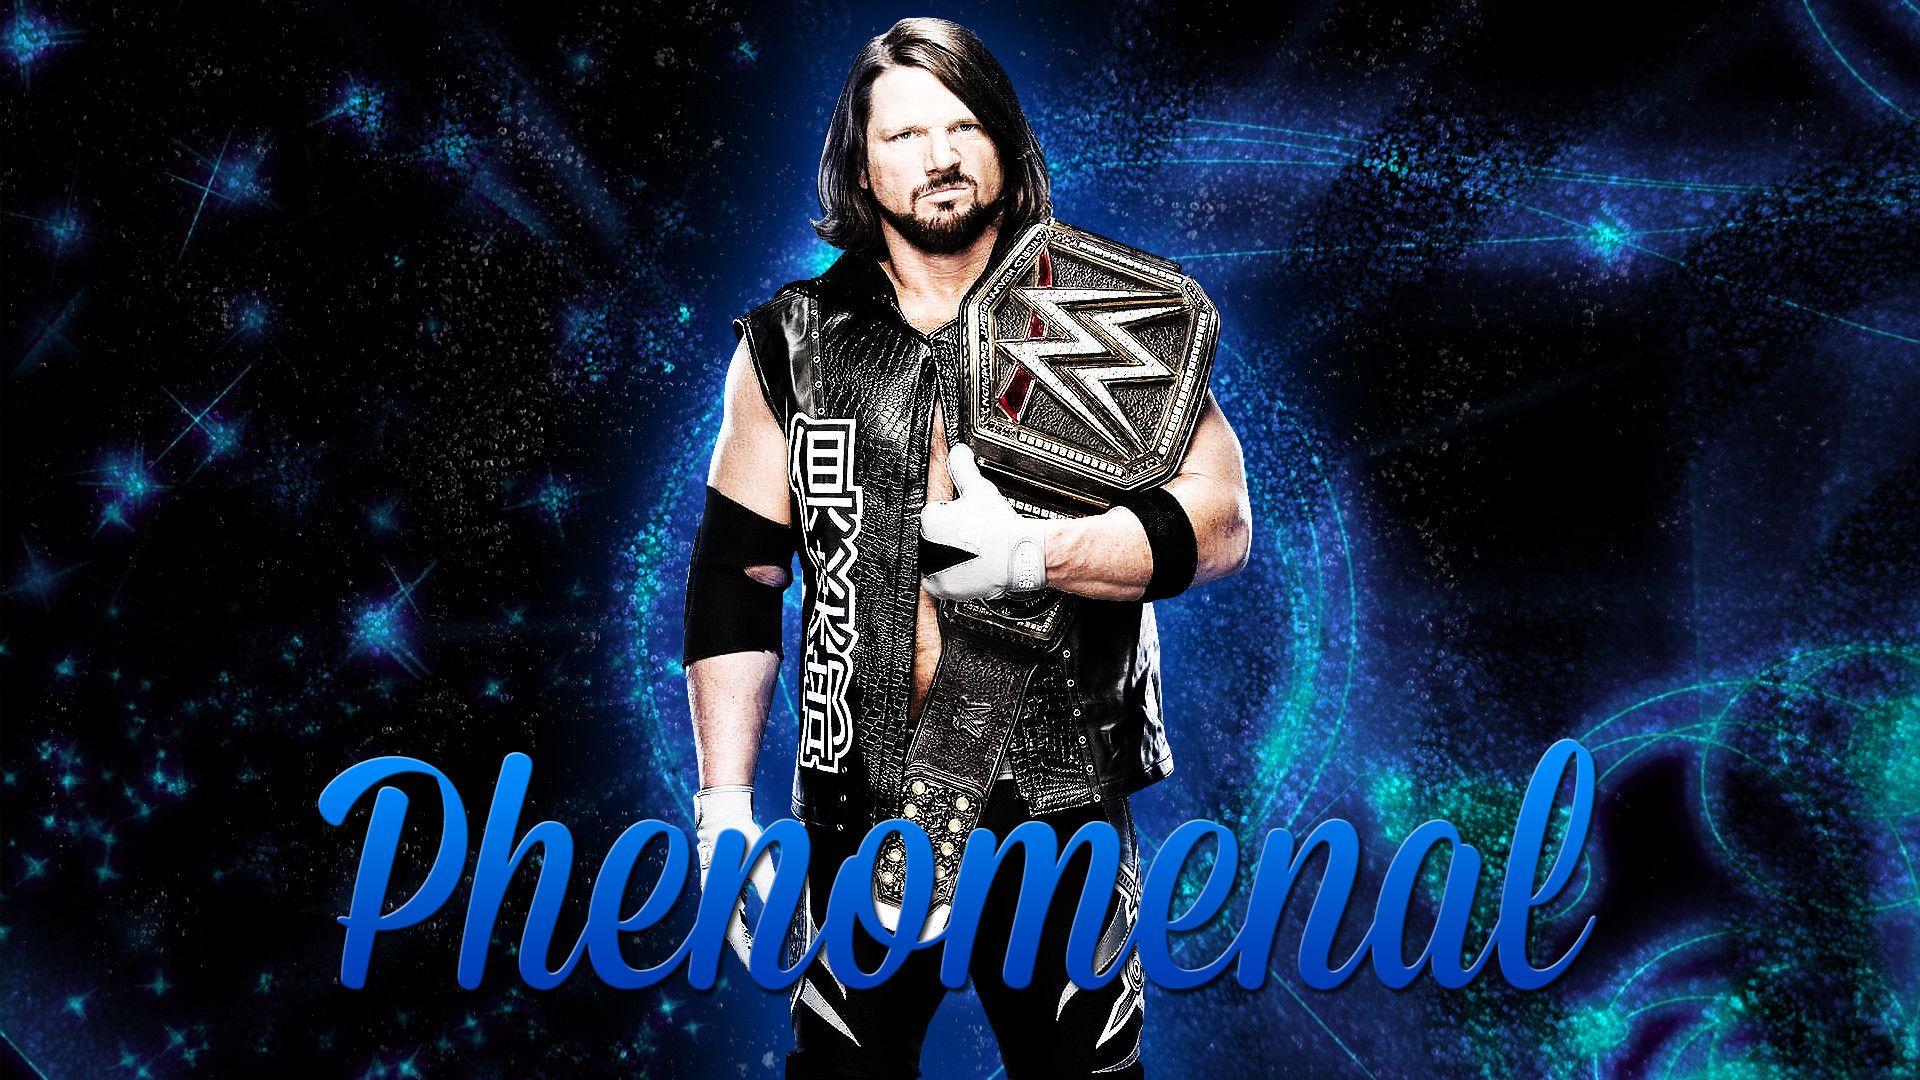 A.J. Styles Wallpapers - Wallpaper Cave